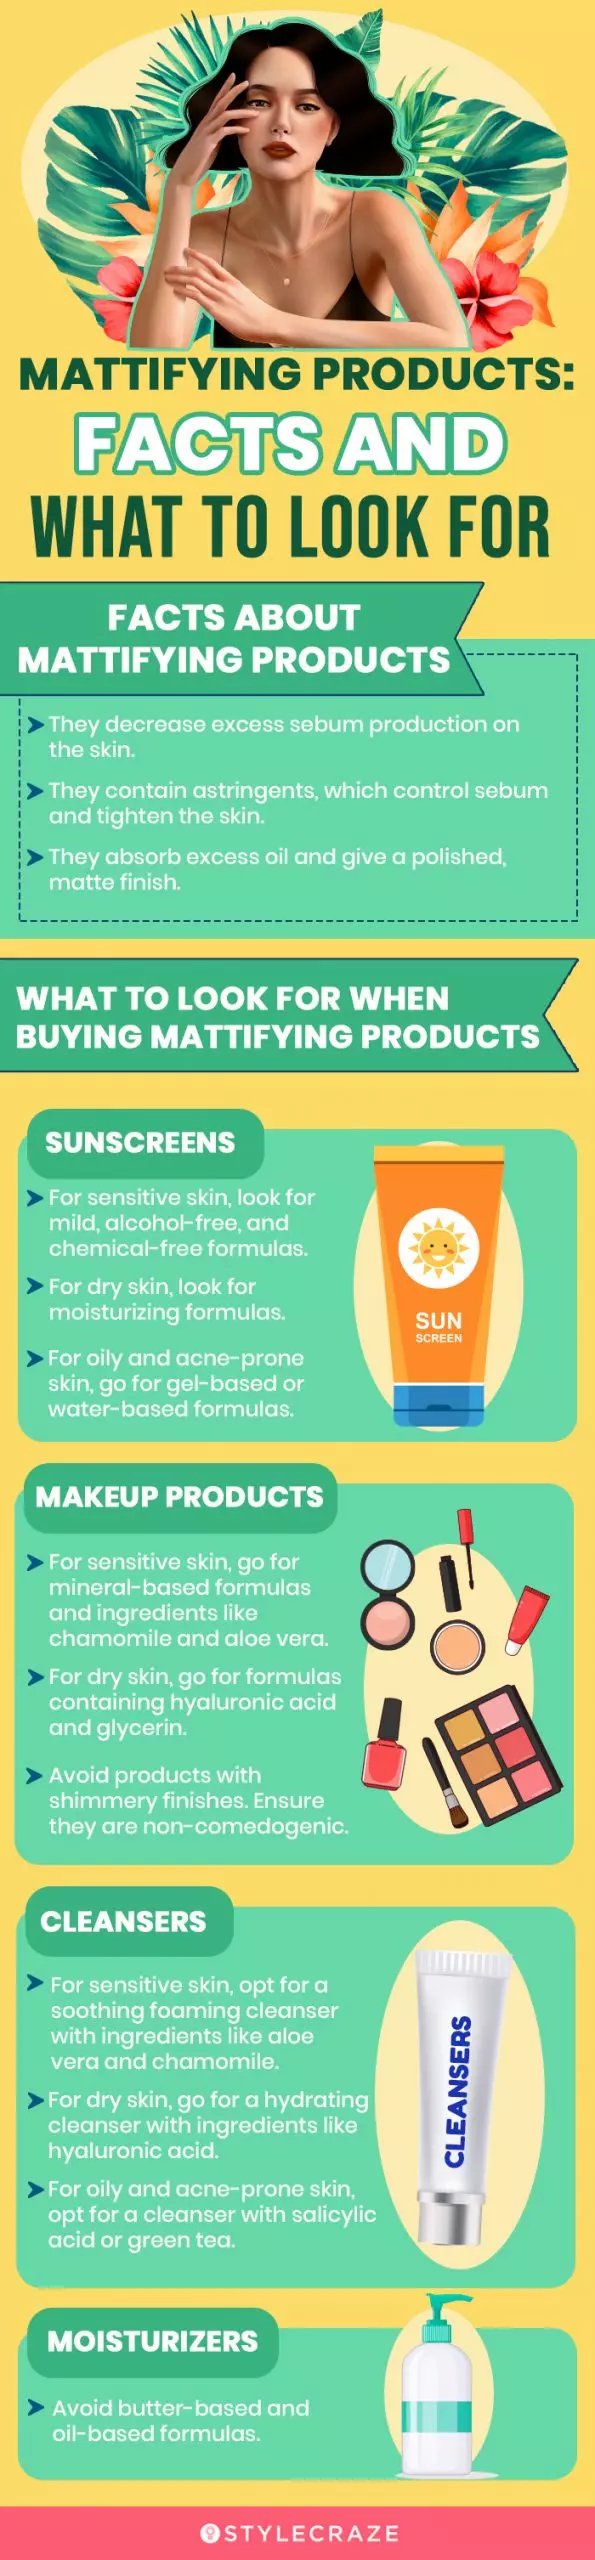 Mattifying Products: Facts and what to look for